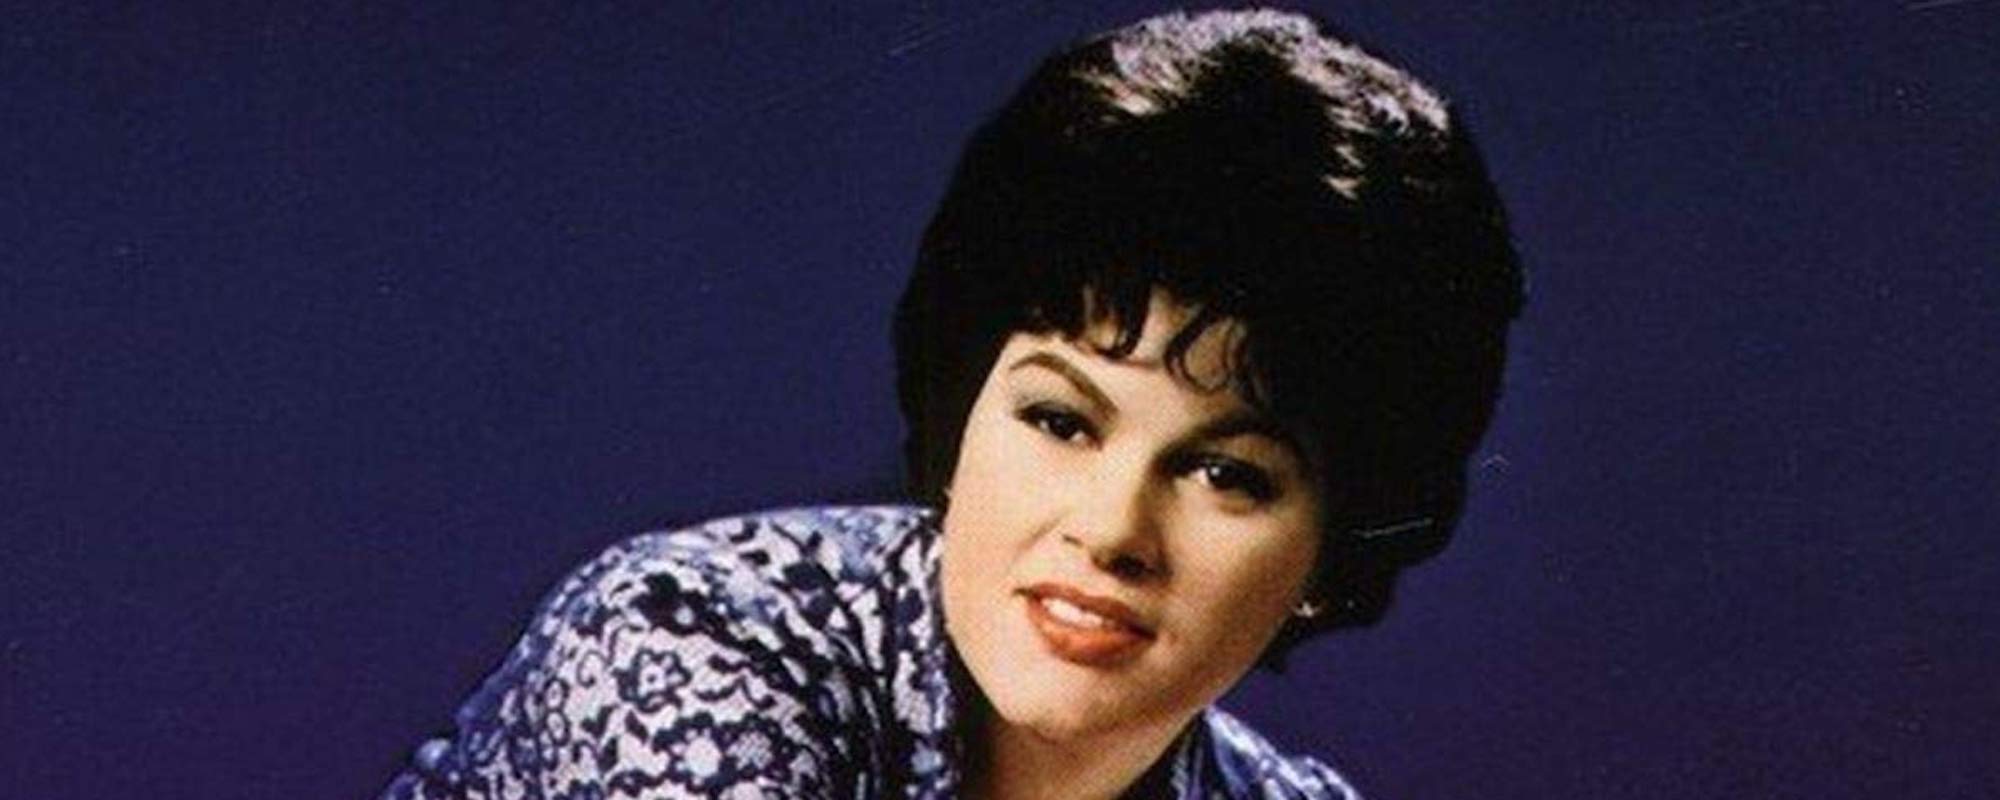 Top 10 Songs by Patsy Cline